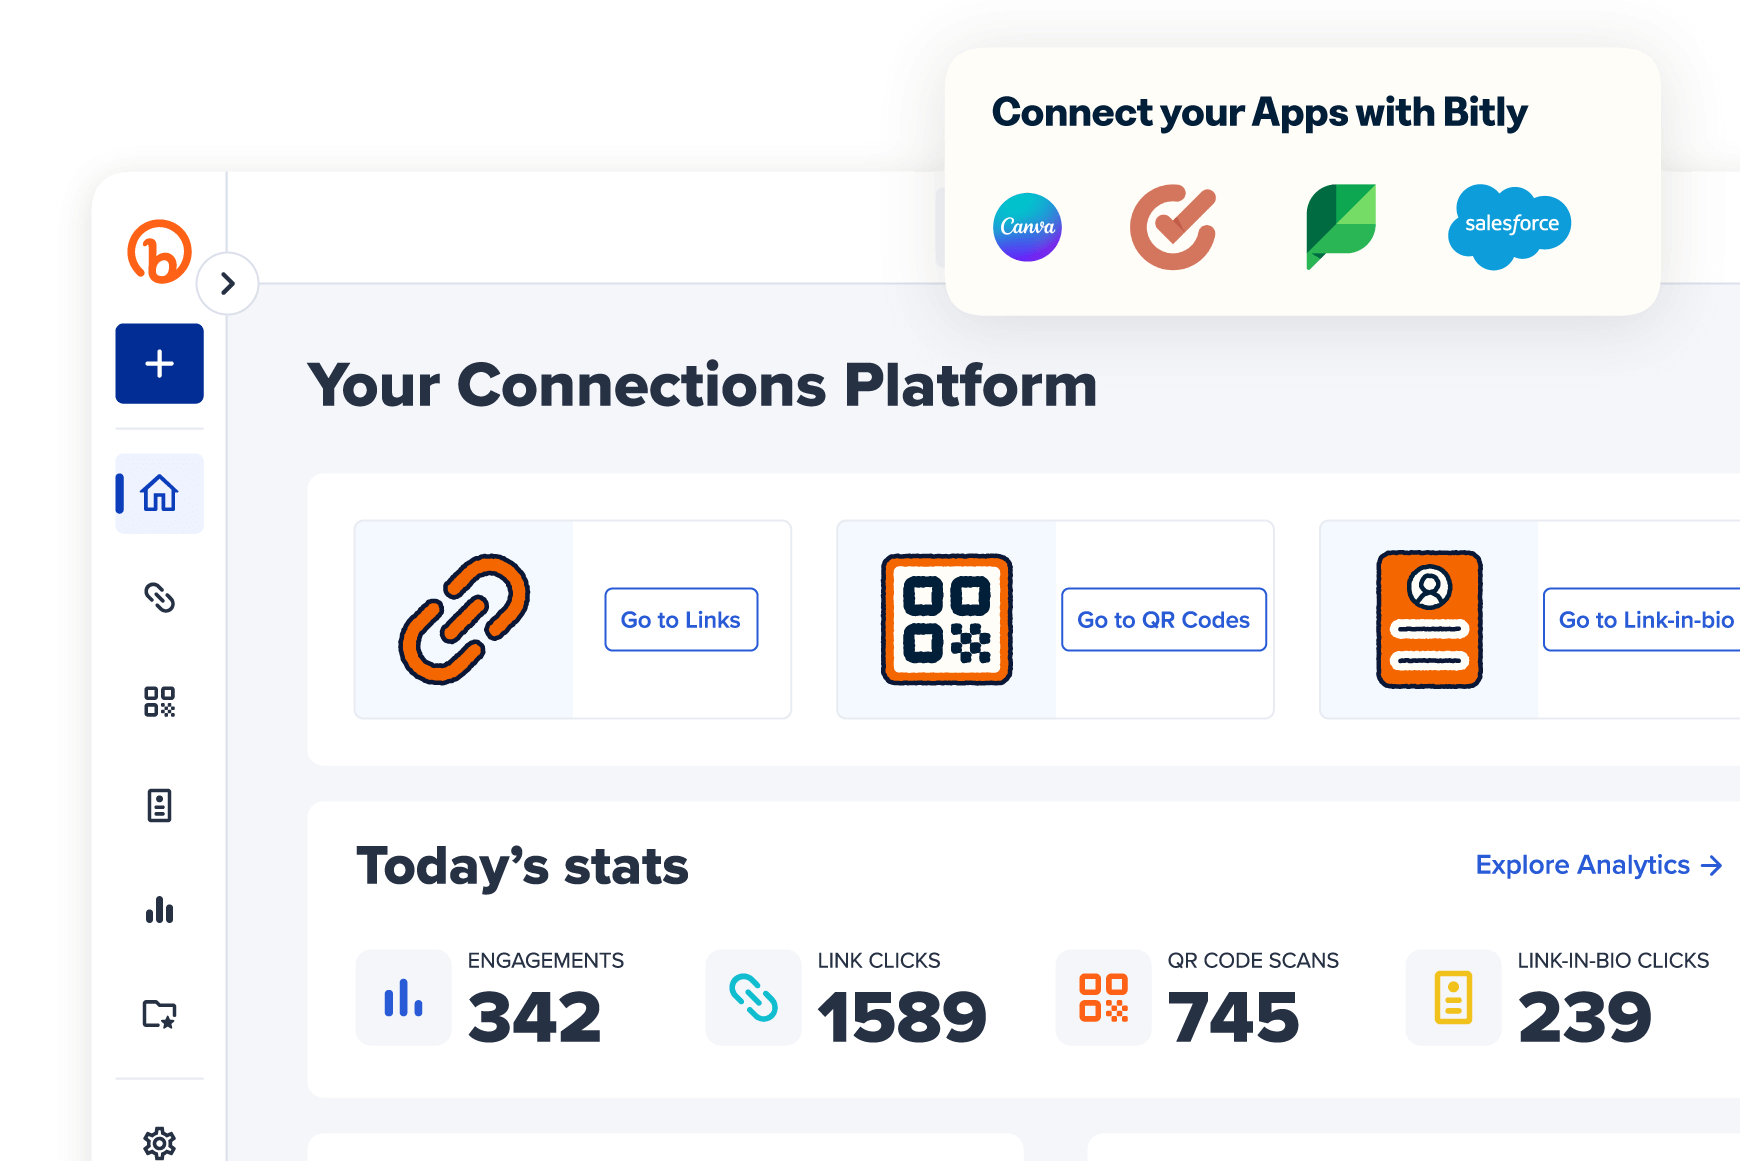 View of the Bitly Connections Platform and products